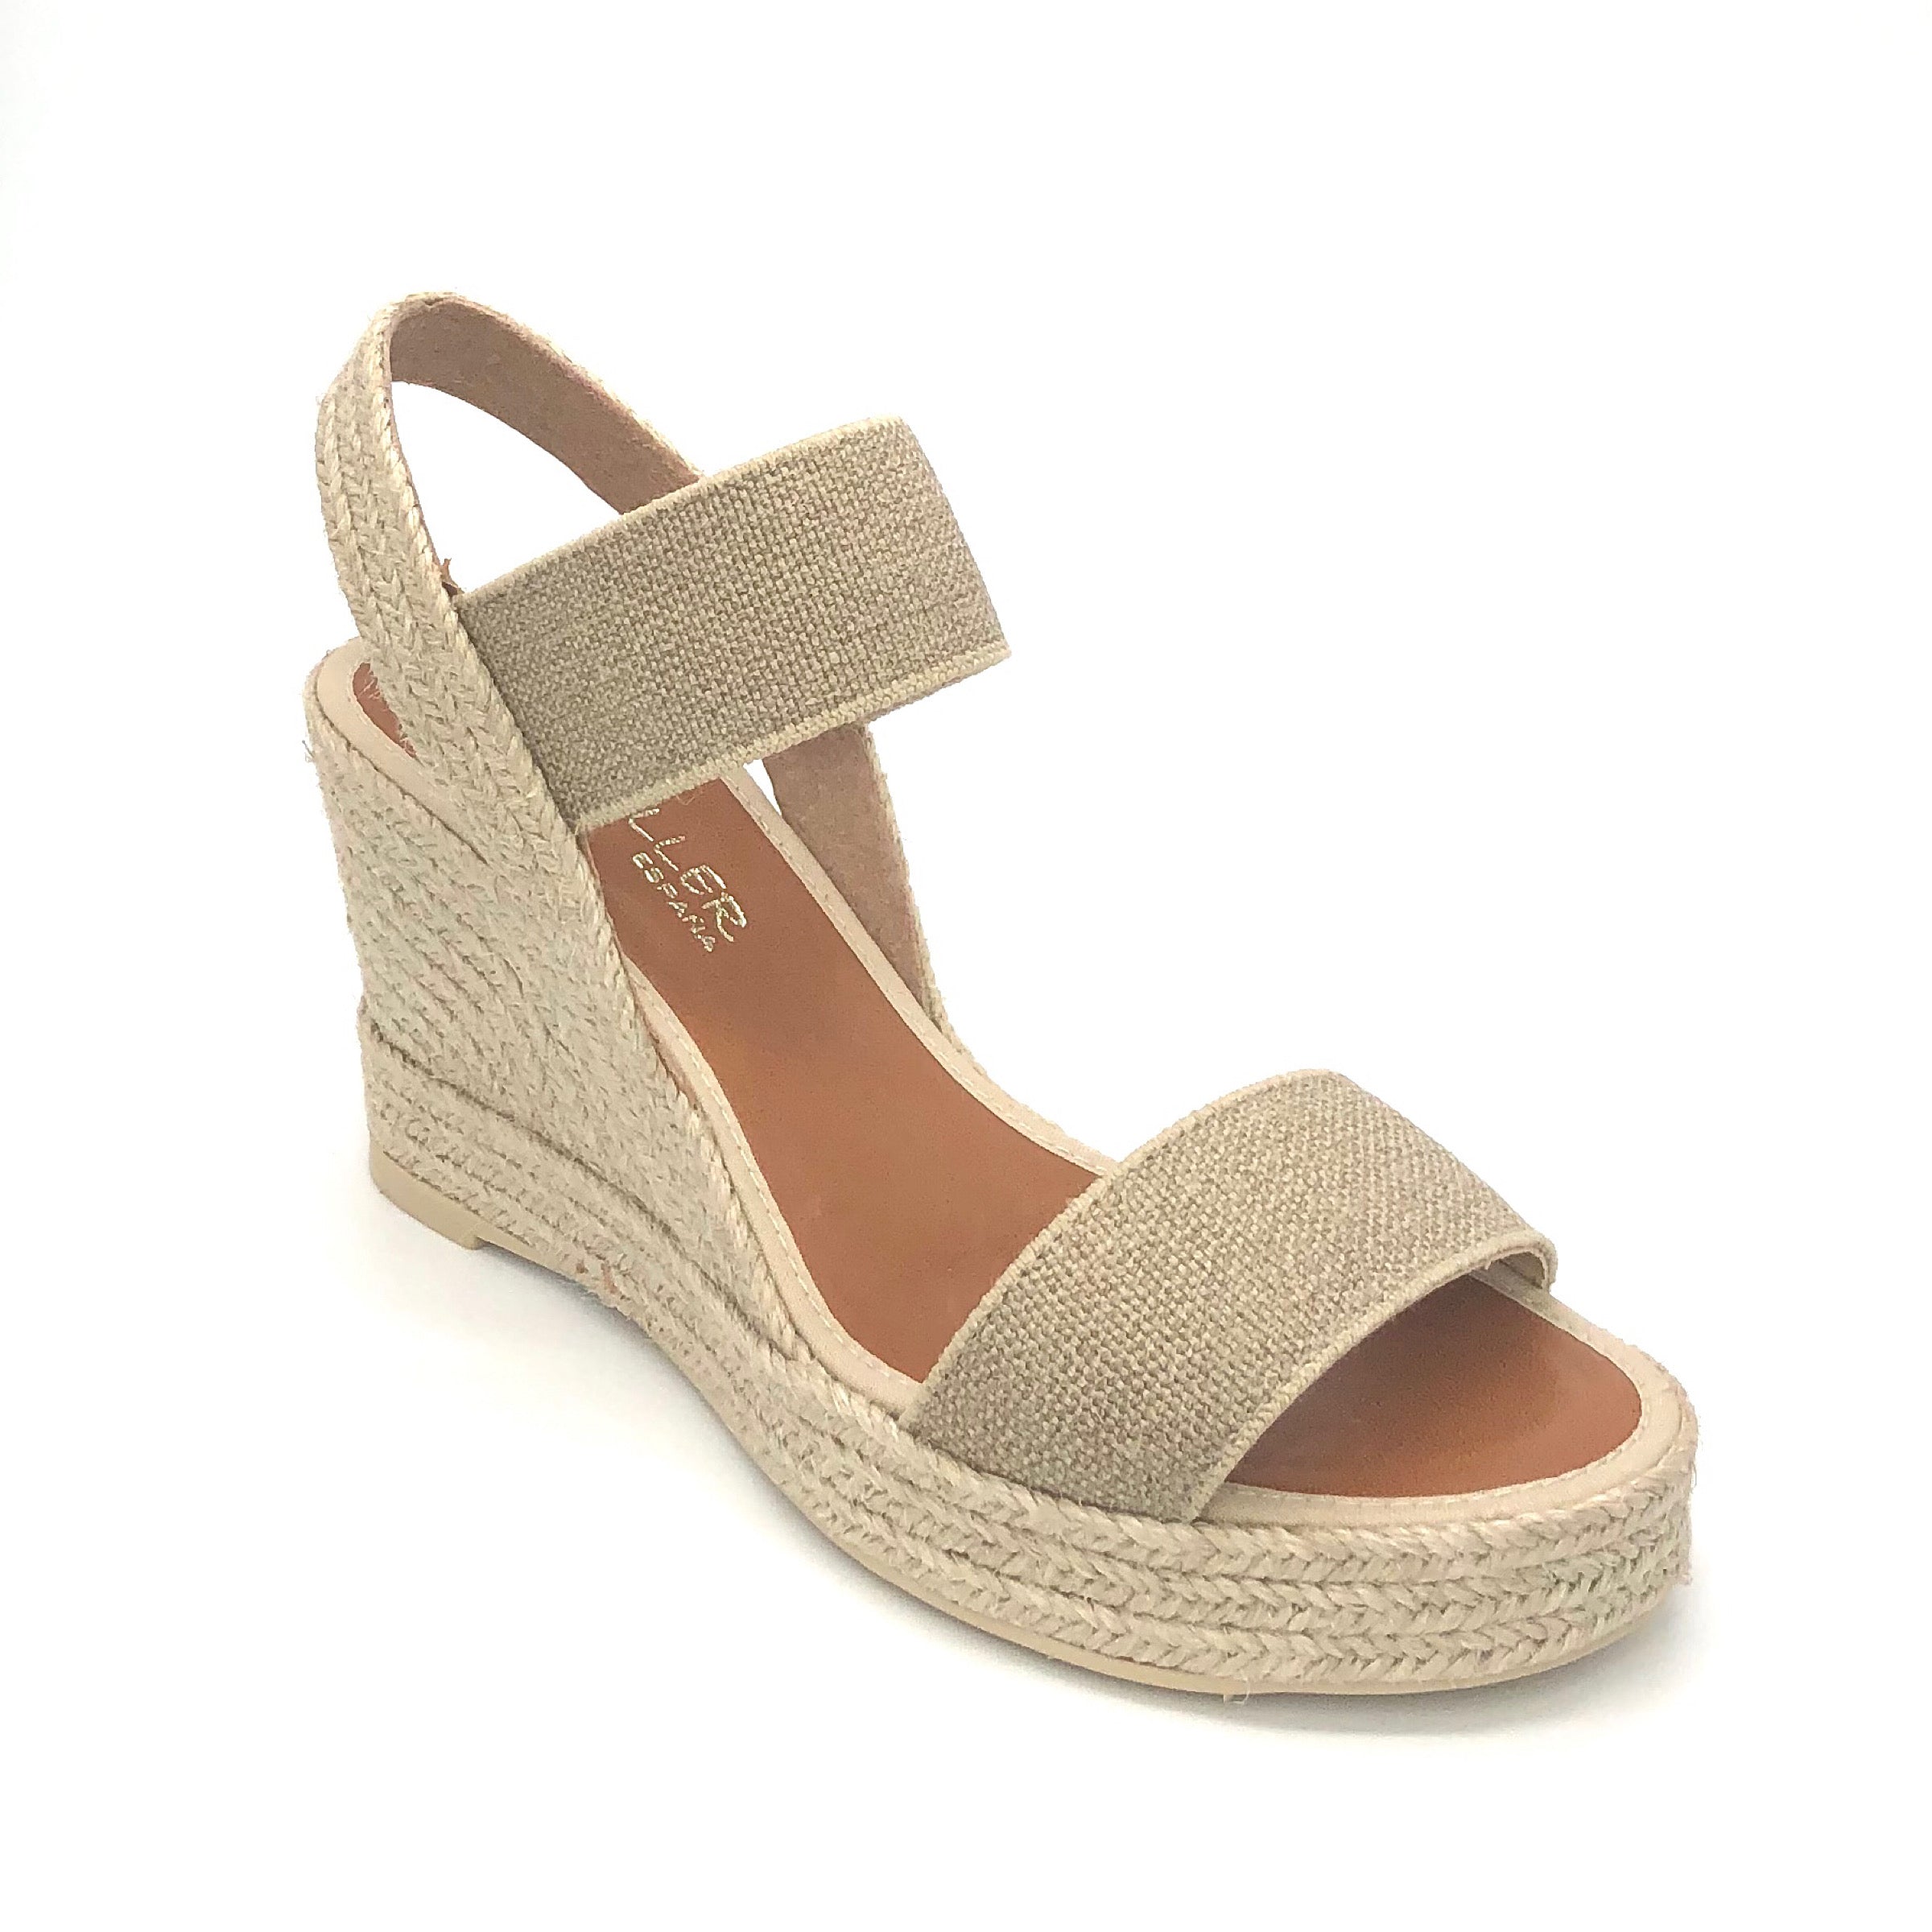 The Elastic 2 Band Espadrille in Natural Linen. This timeless and fashionable 2 band elastic top selling platform jute espadrille on mid wedge is the perfect neutral shoe for any outfit.